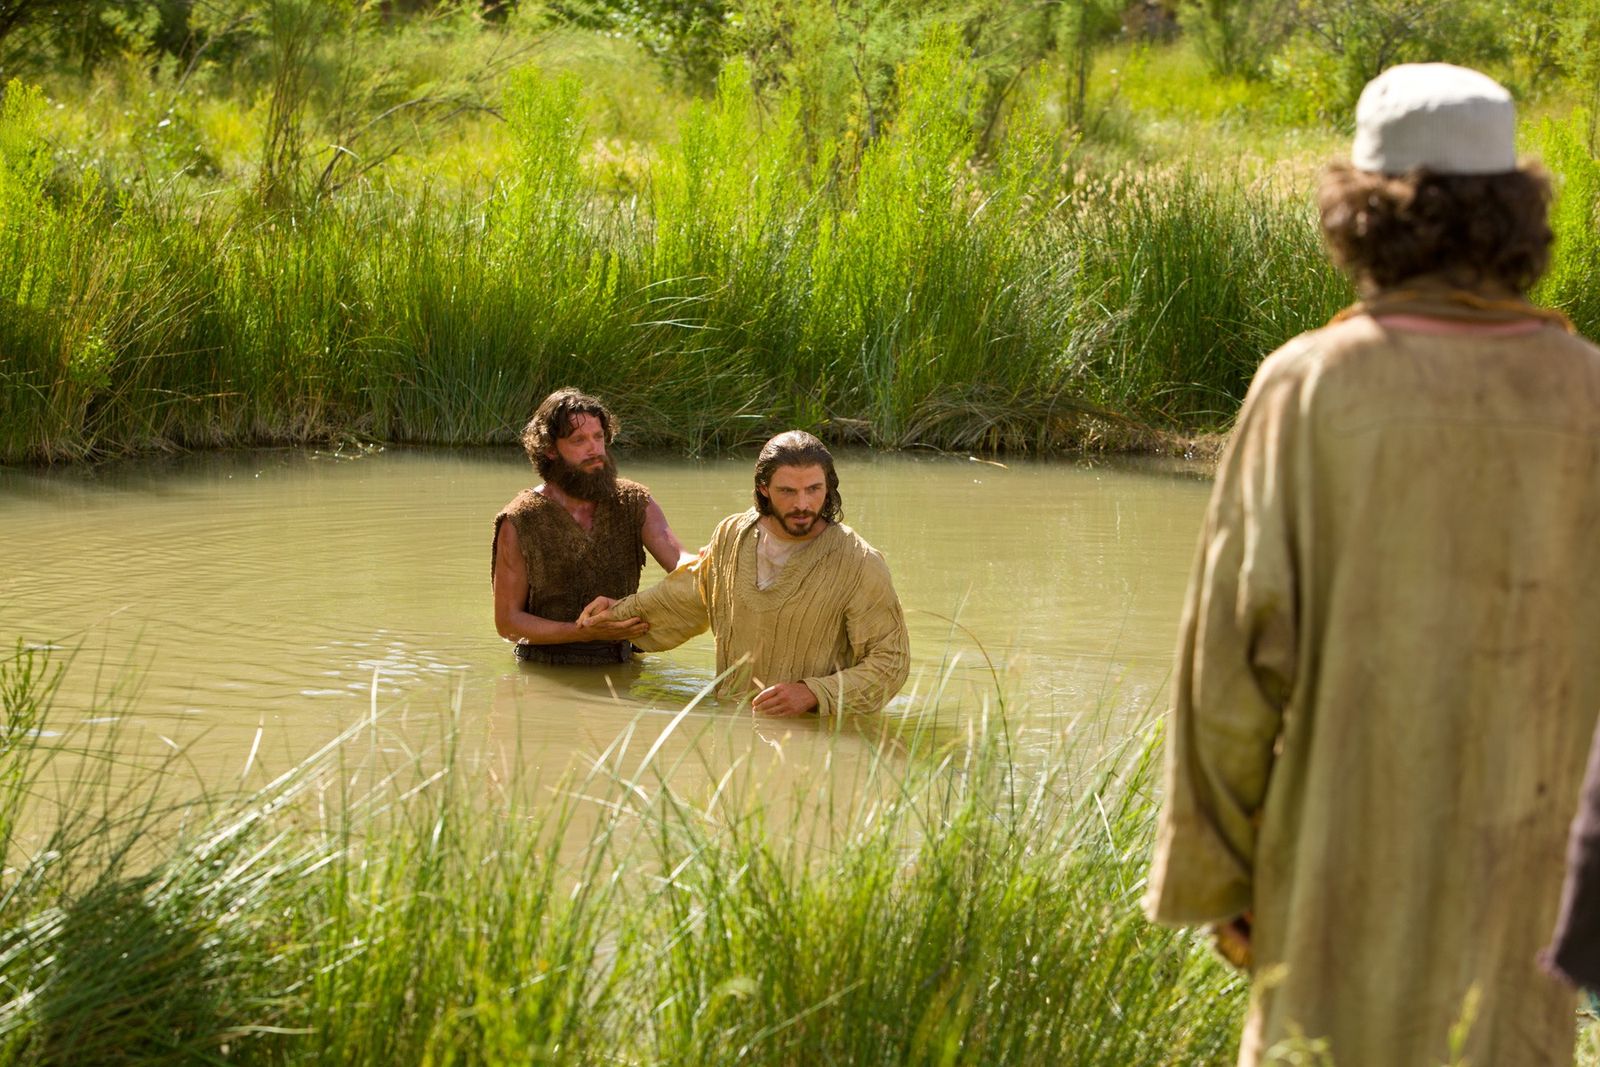 After being baptized, Jesus leaves the waters of Jordan.